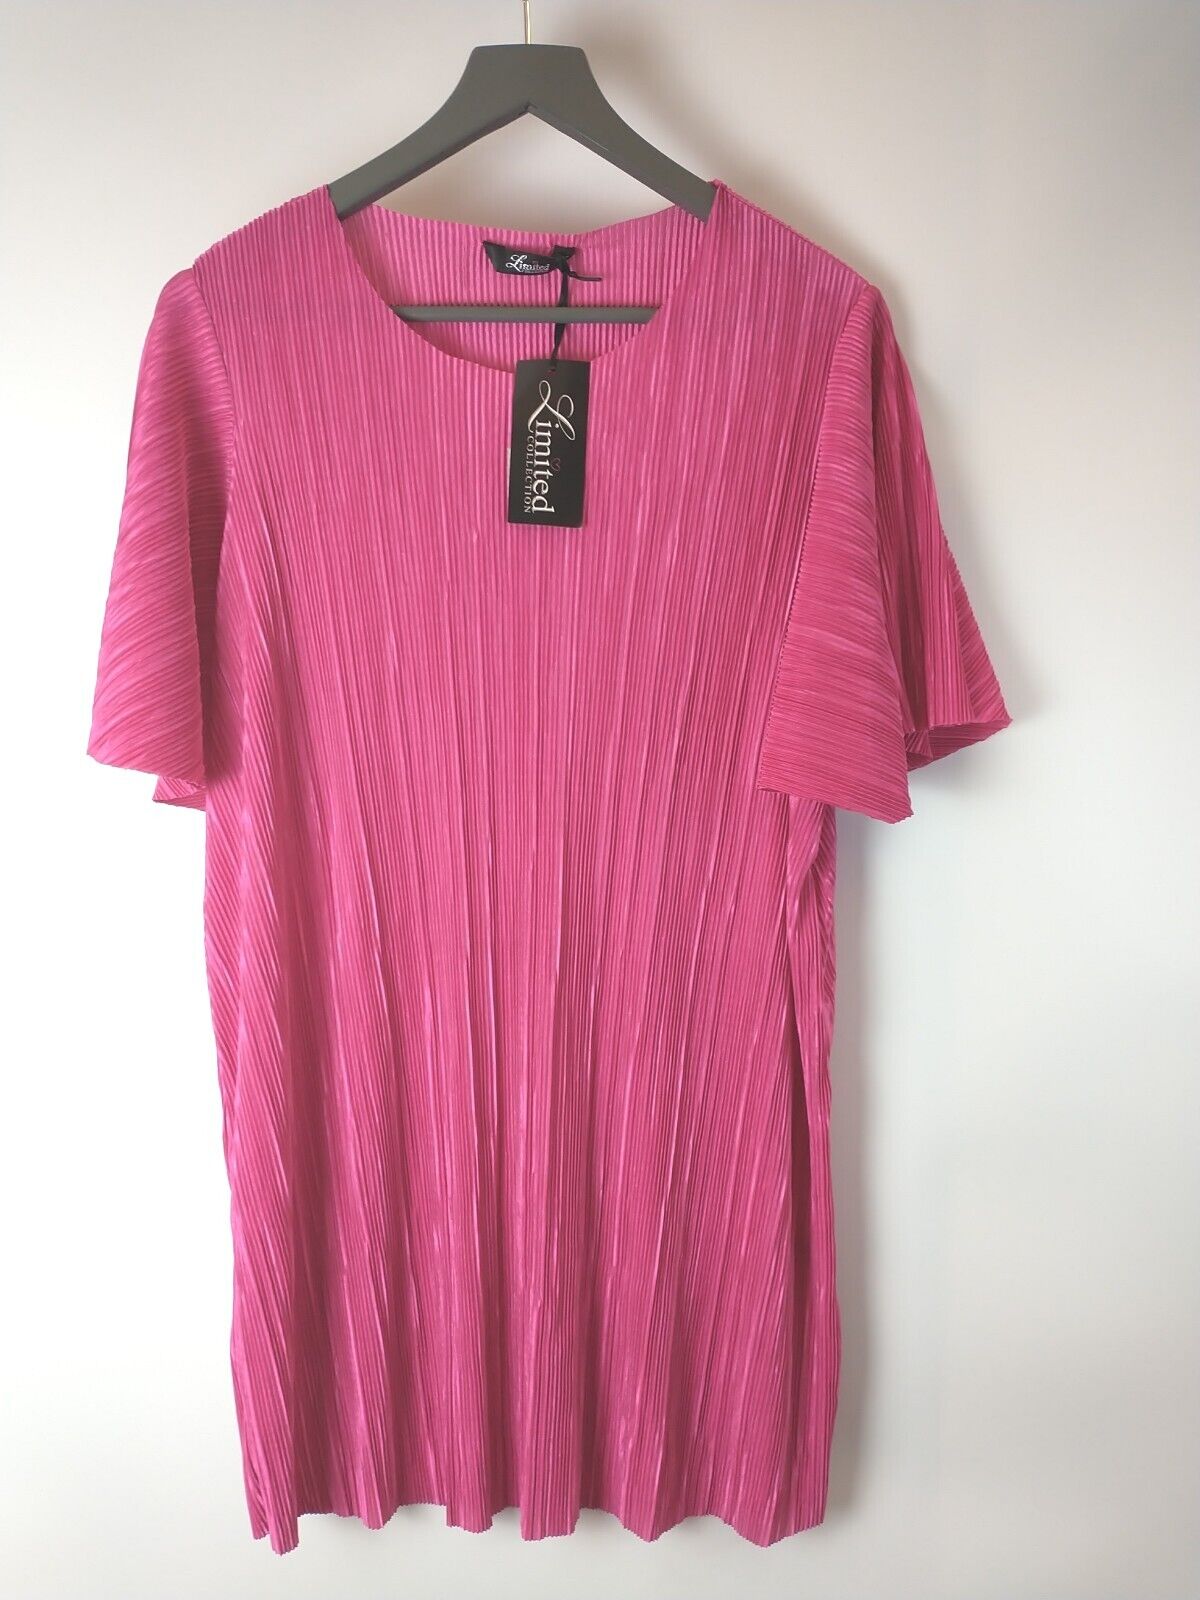 Yours Limited Collection Women's Pink Top. UK 20 **** Ref V180